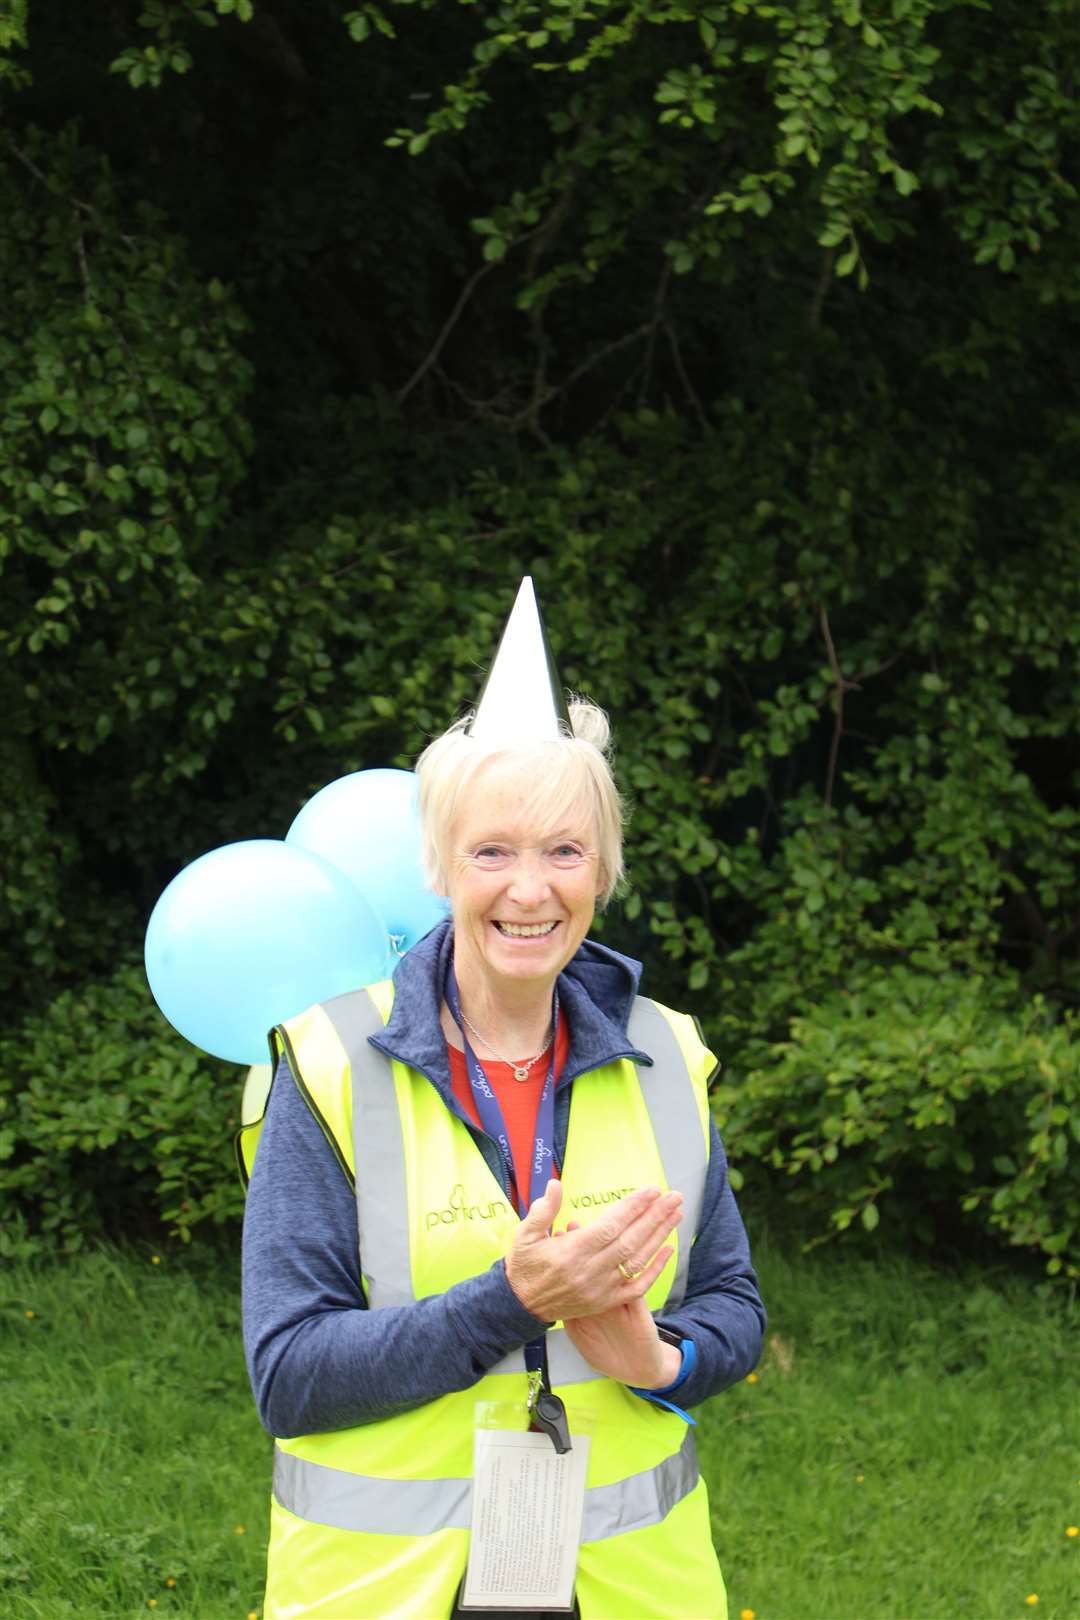 One of the volunteer marshals who was wearing balloons for the occasion.